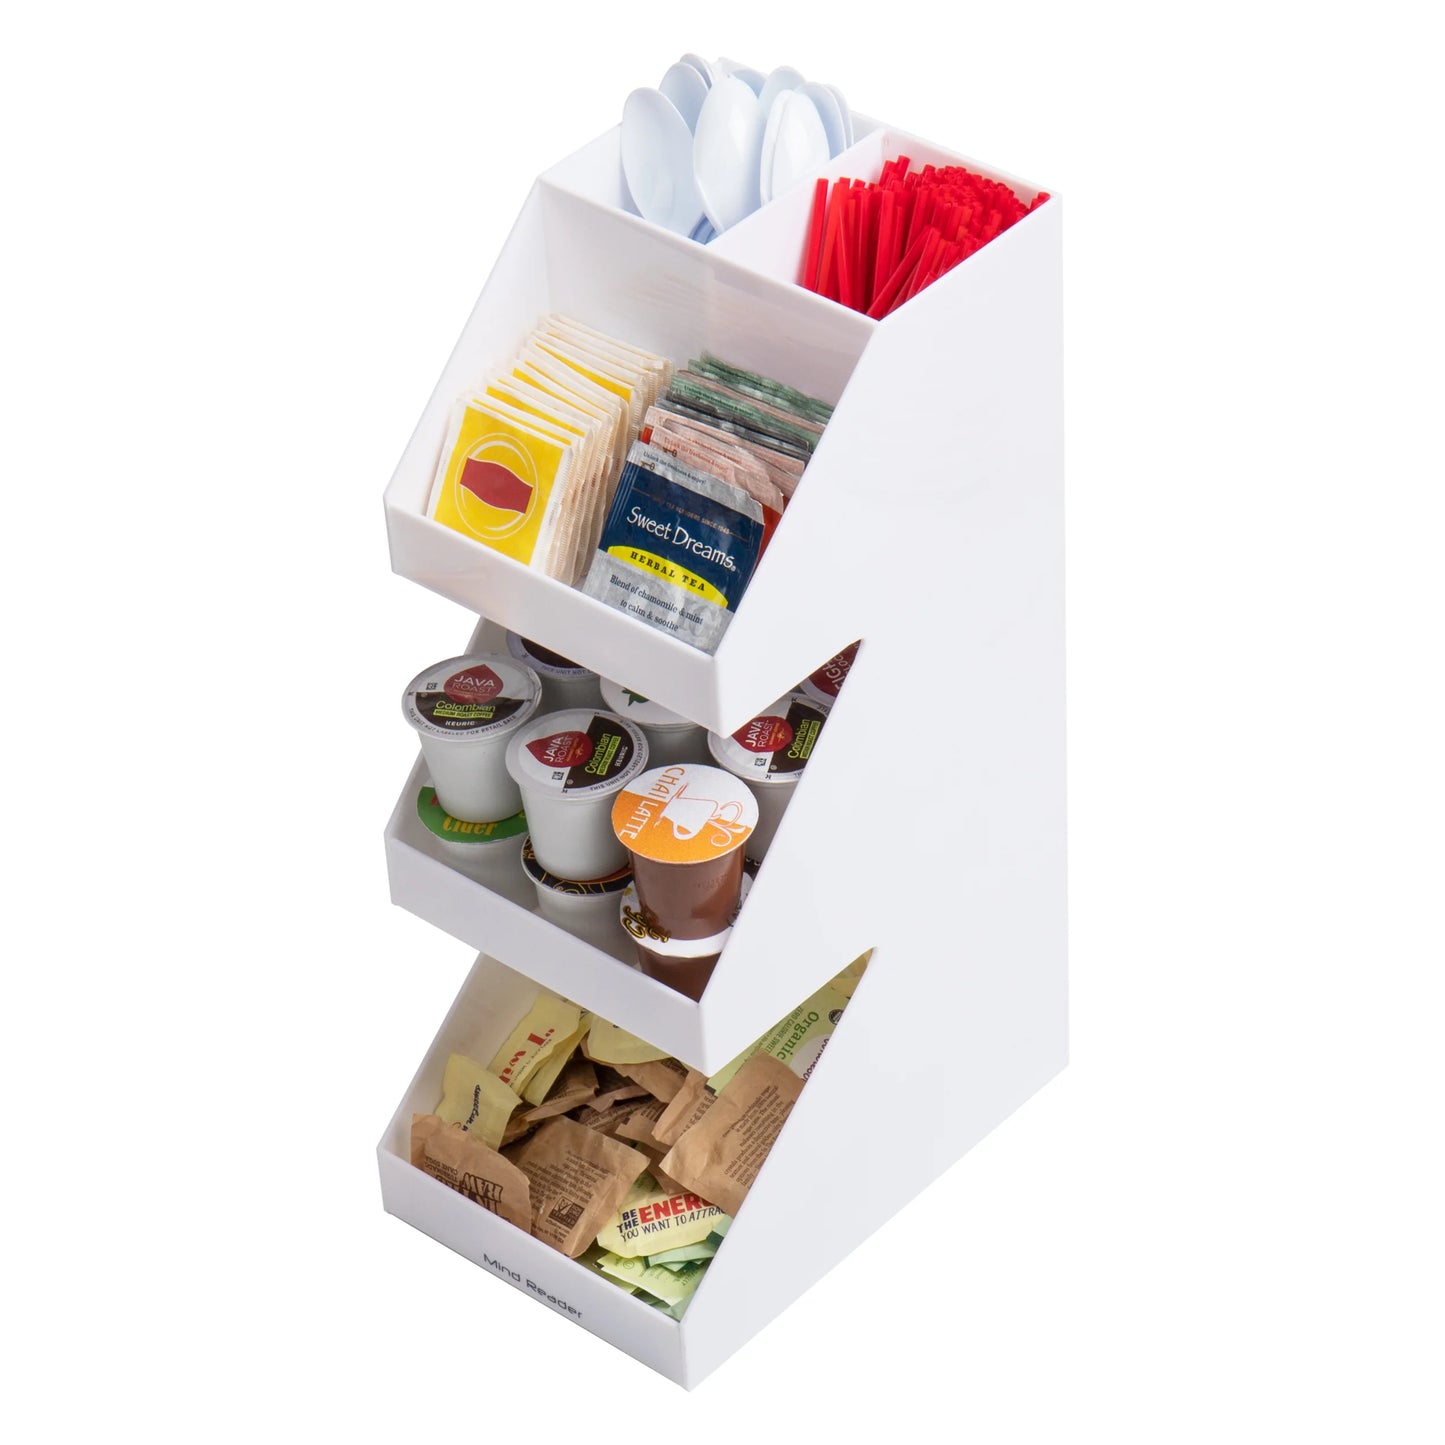 Mind Reader Foundation Collection, 3-Tier, 5-Compartment Coffee, Tea, Utensil and Condiment Dispenser, Countertop Organizer, Kitchen and Breakroom, 6"L x 7.25"W x 15.6"H, Black